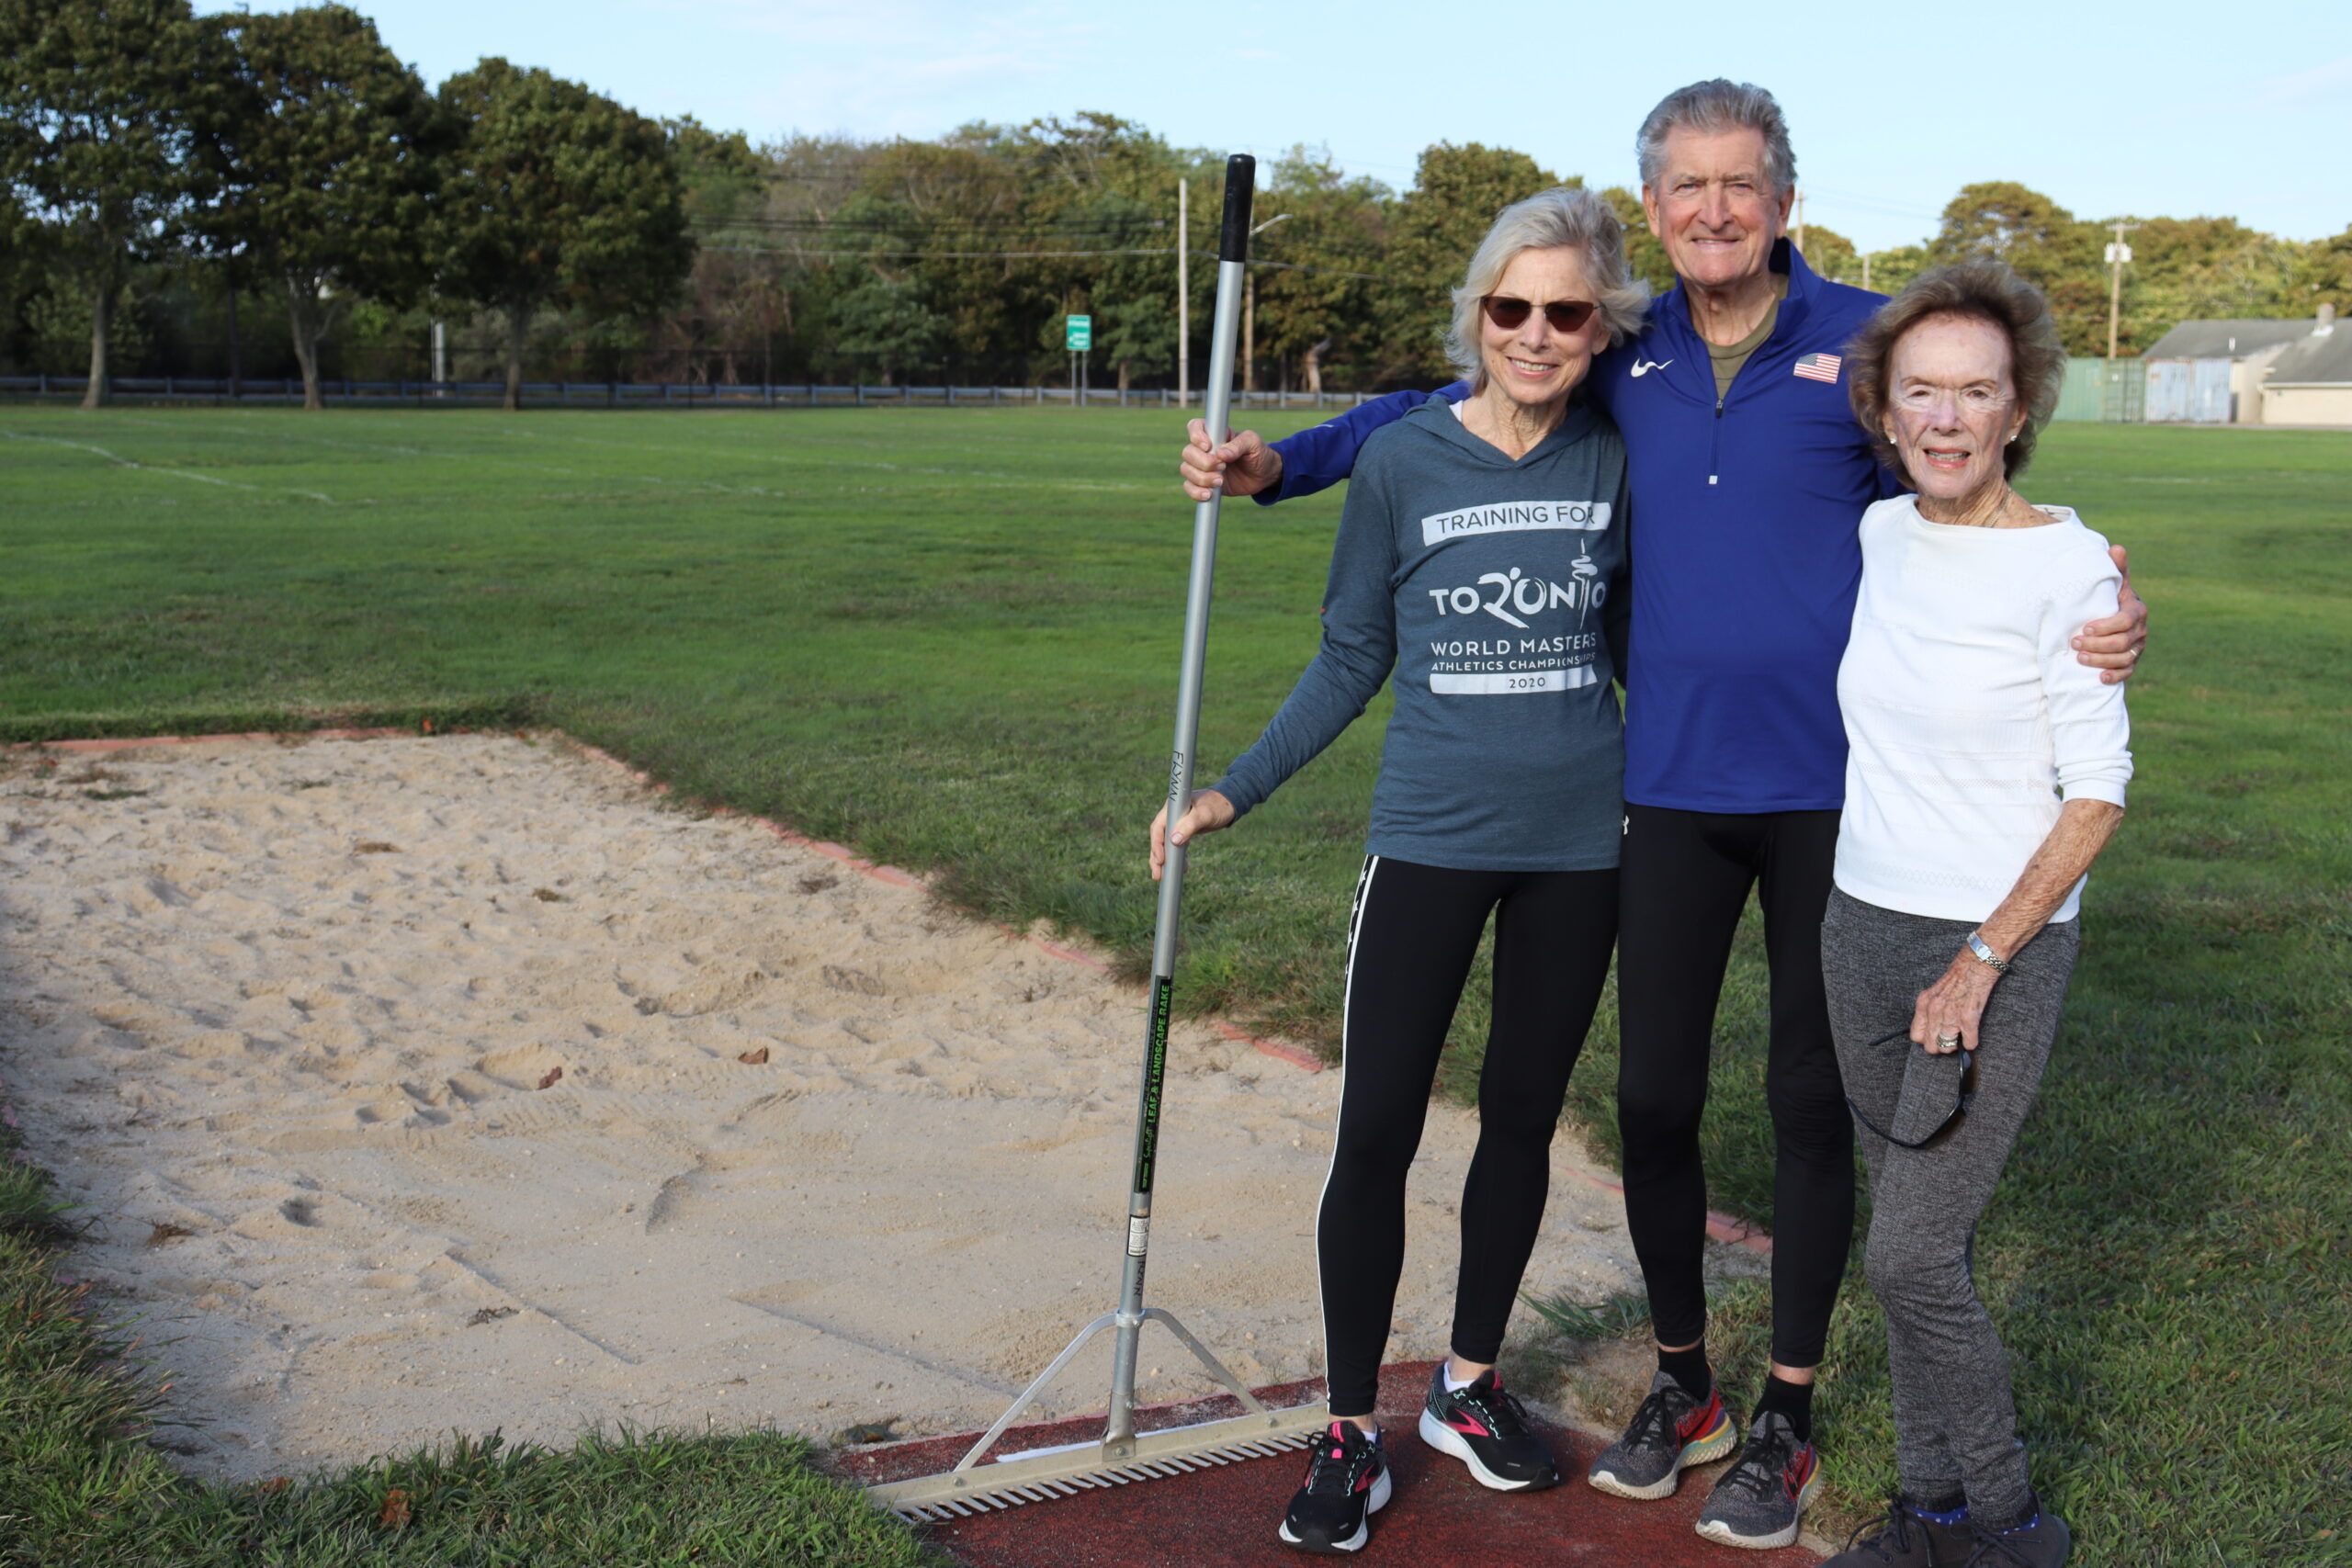 From left, Joy Flynn, Dan Flynn and Hala Lawrence. The Quogue residents will compete at the Senior National Games in Pittsburgh in track and field in July. CAILIN RILEY